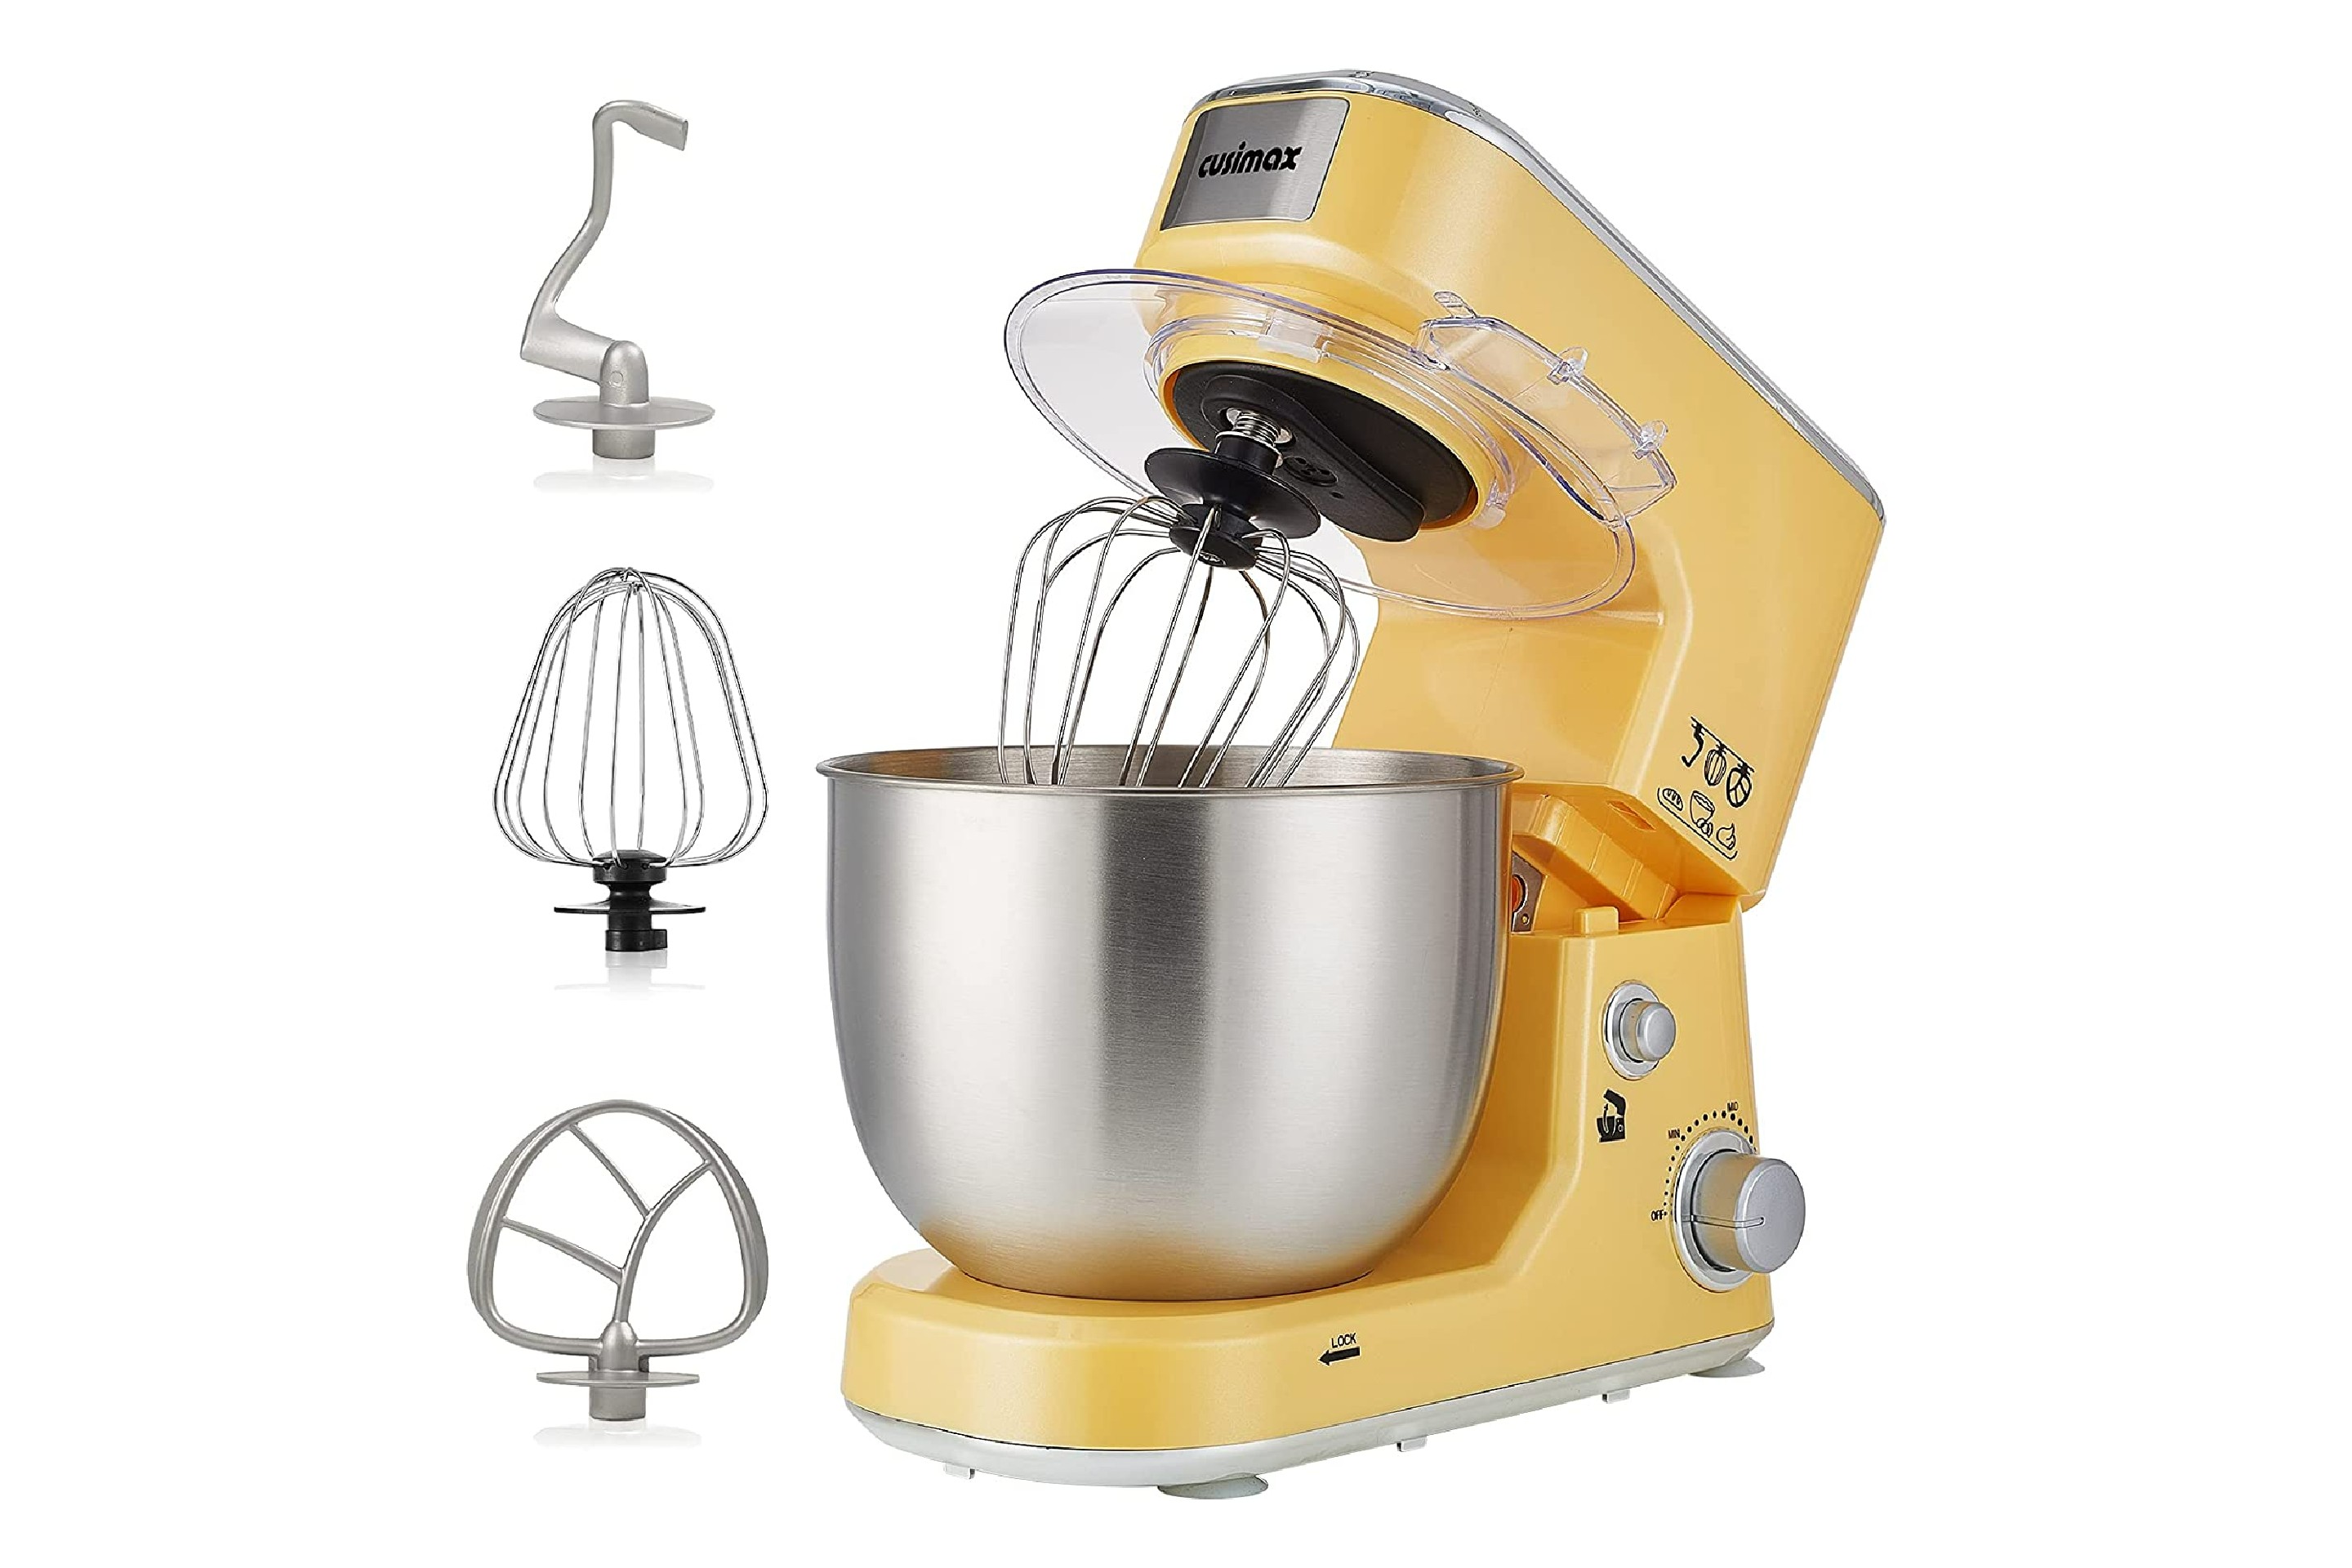 Yellow CUSIMAX 5-Quart Tilt-Head Electric Stand Mixer with Stainless Steel Bowl